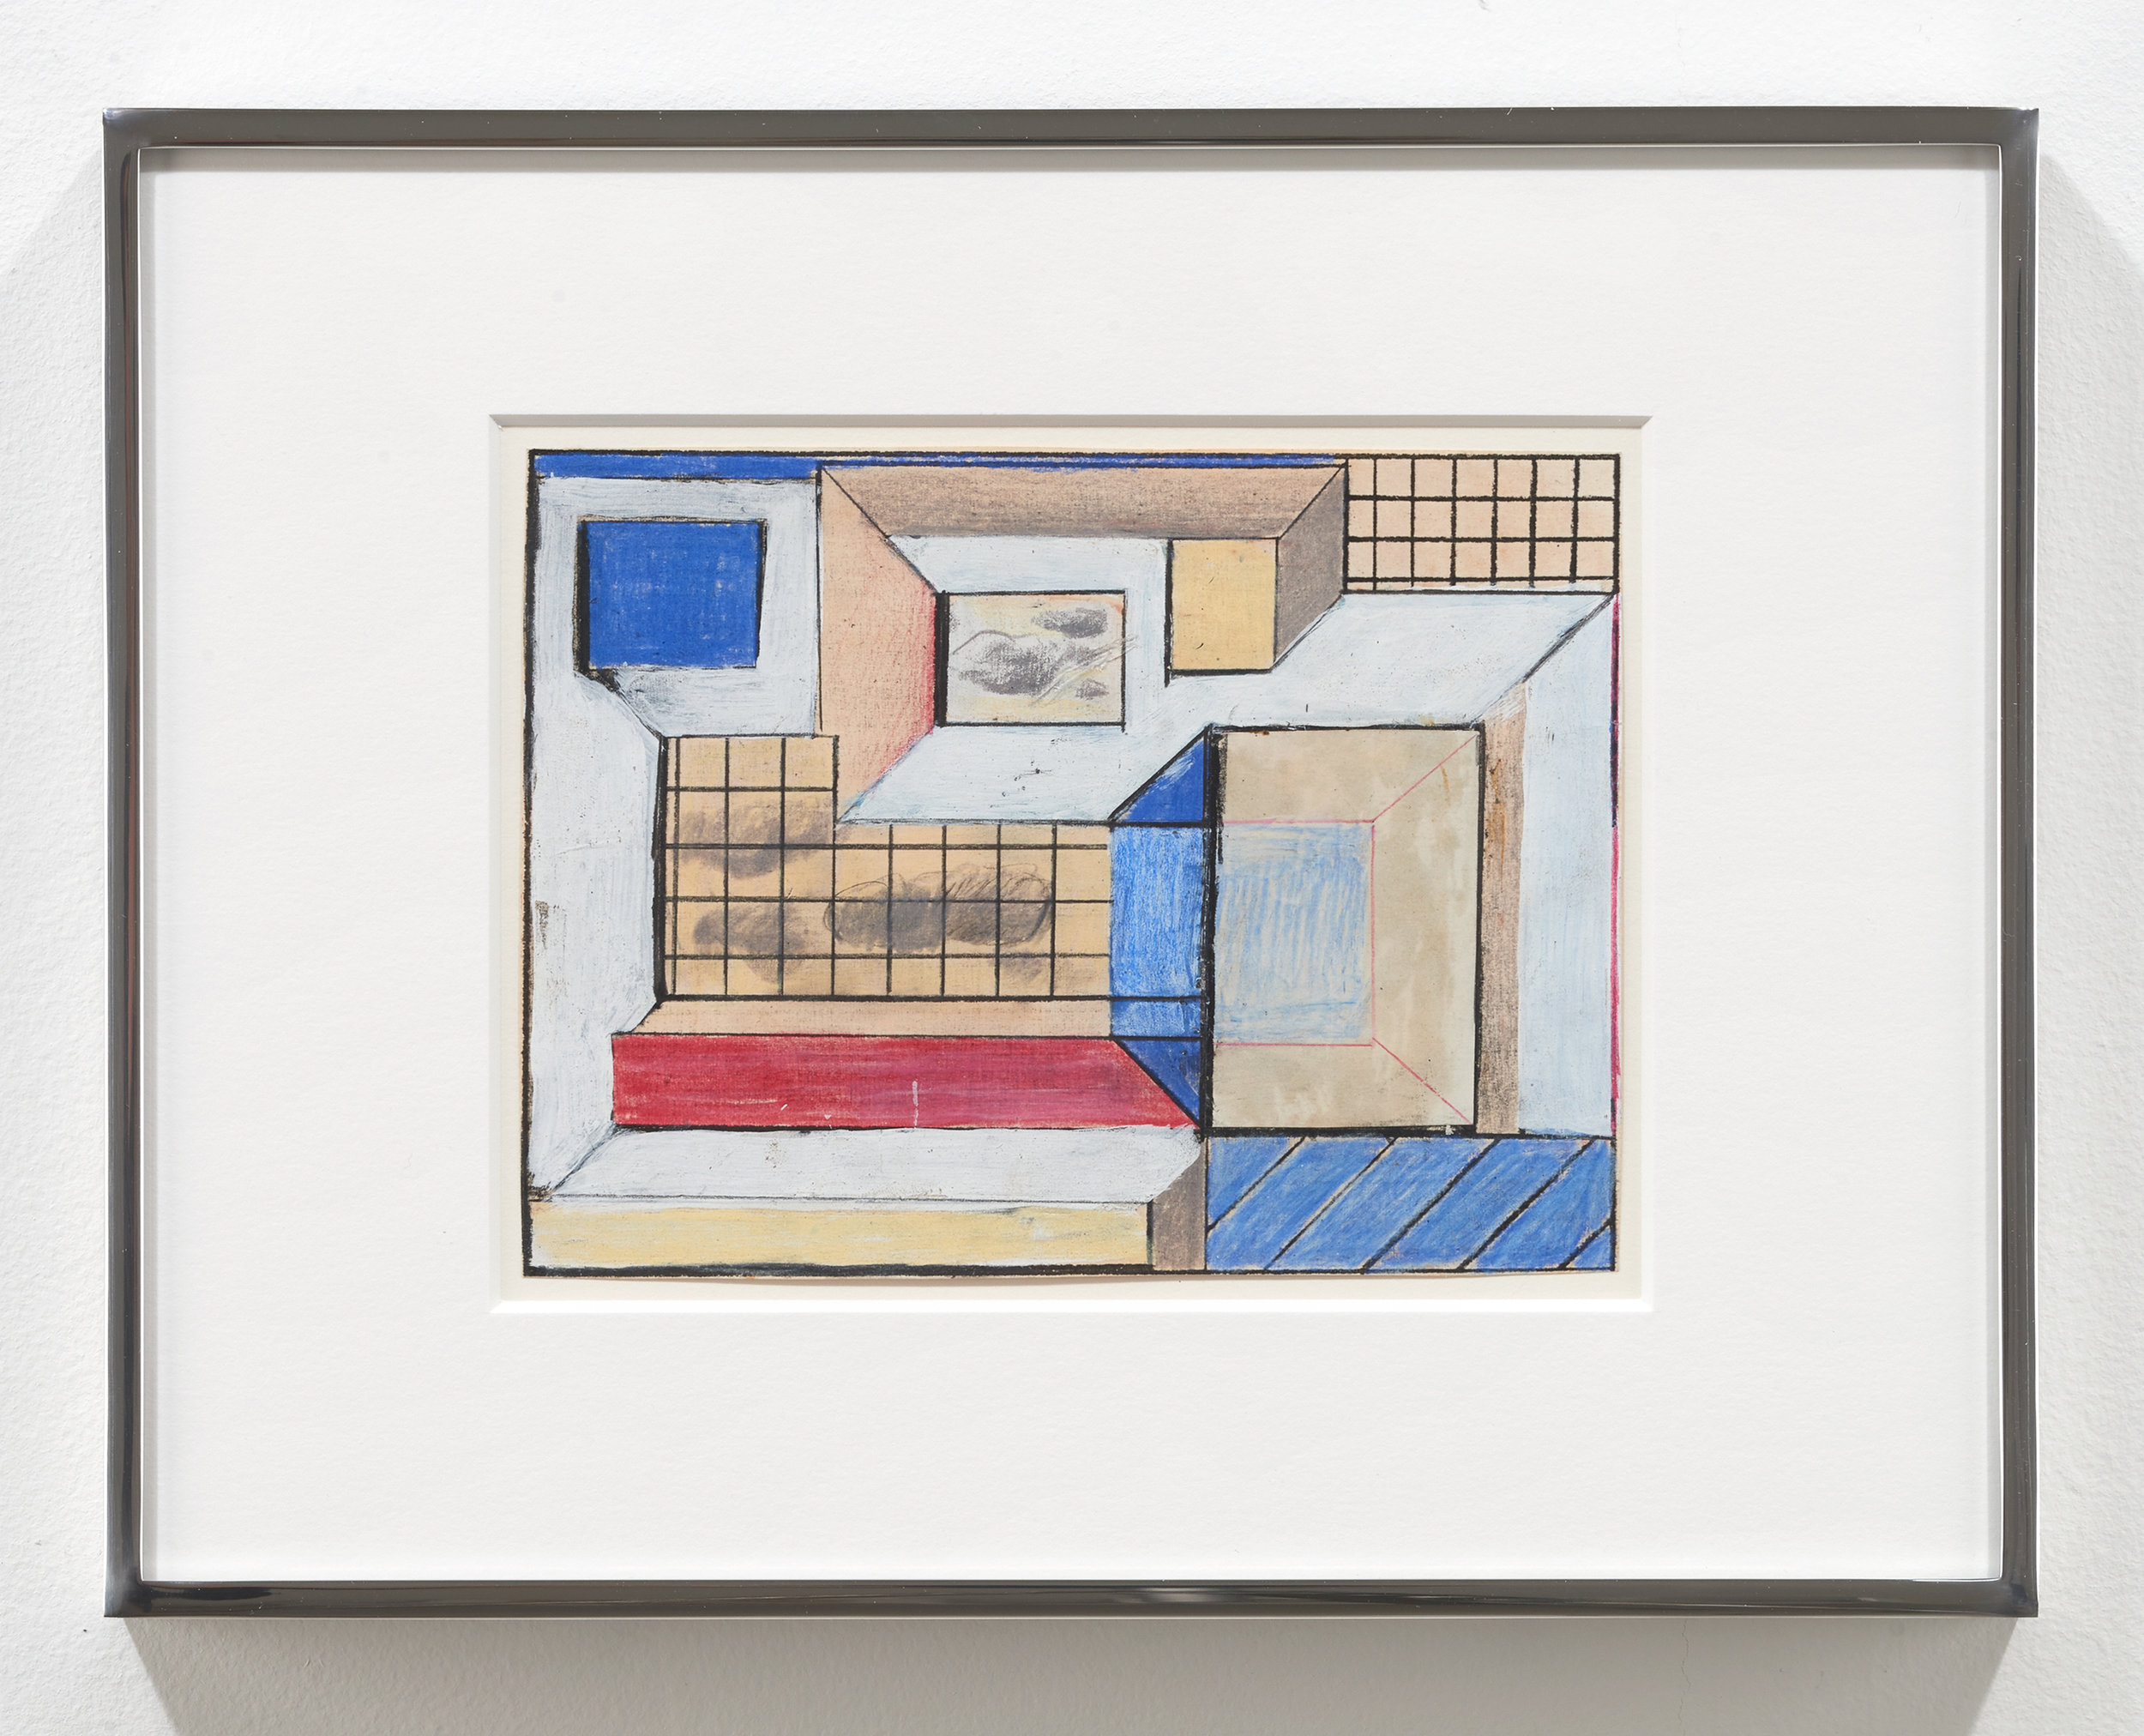  Suzanne Blank Redstone,  Drawing for Portal 1 , 1967, Paper, tracing paper, pencil and color pencil, Framed dimensions: 8.75 x 11.25 inches 